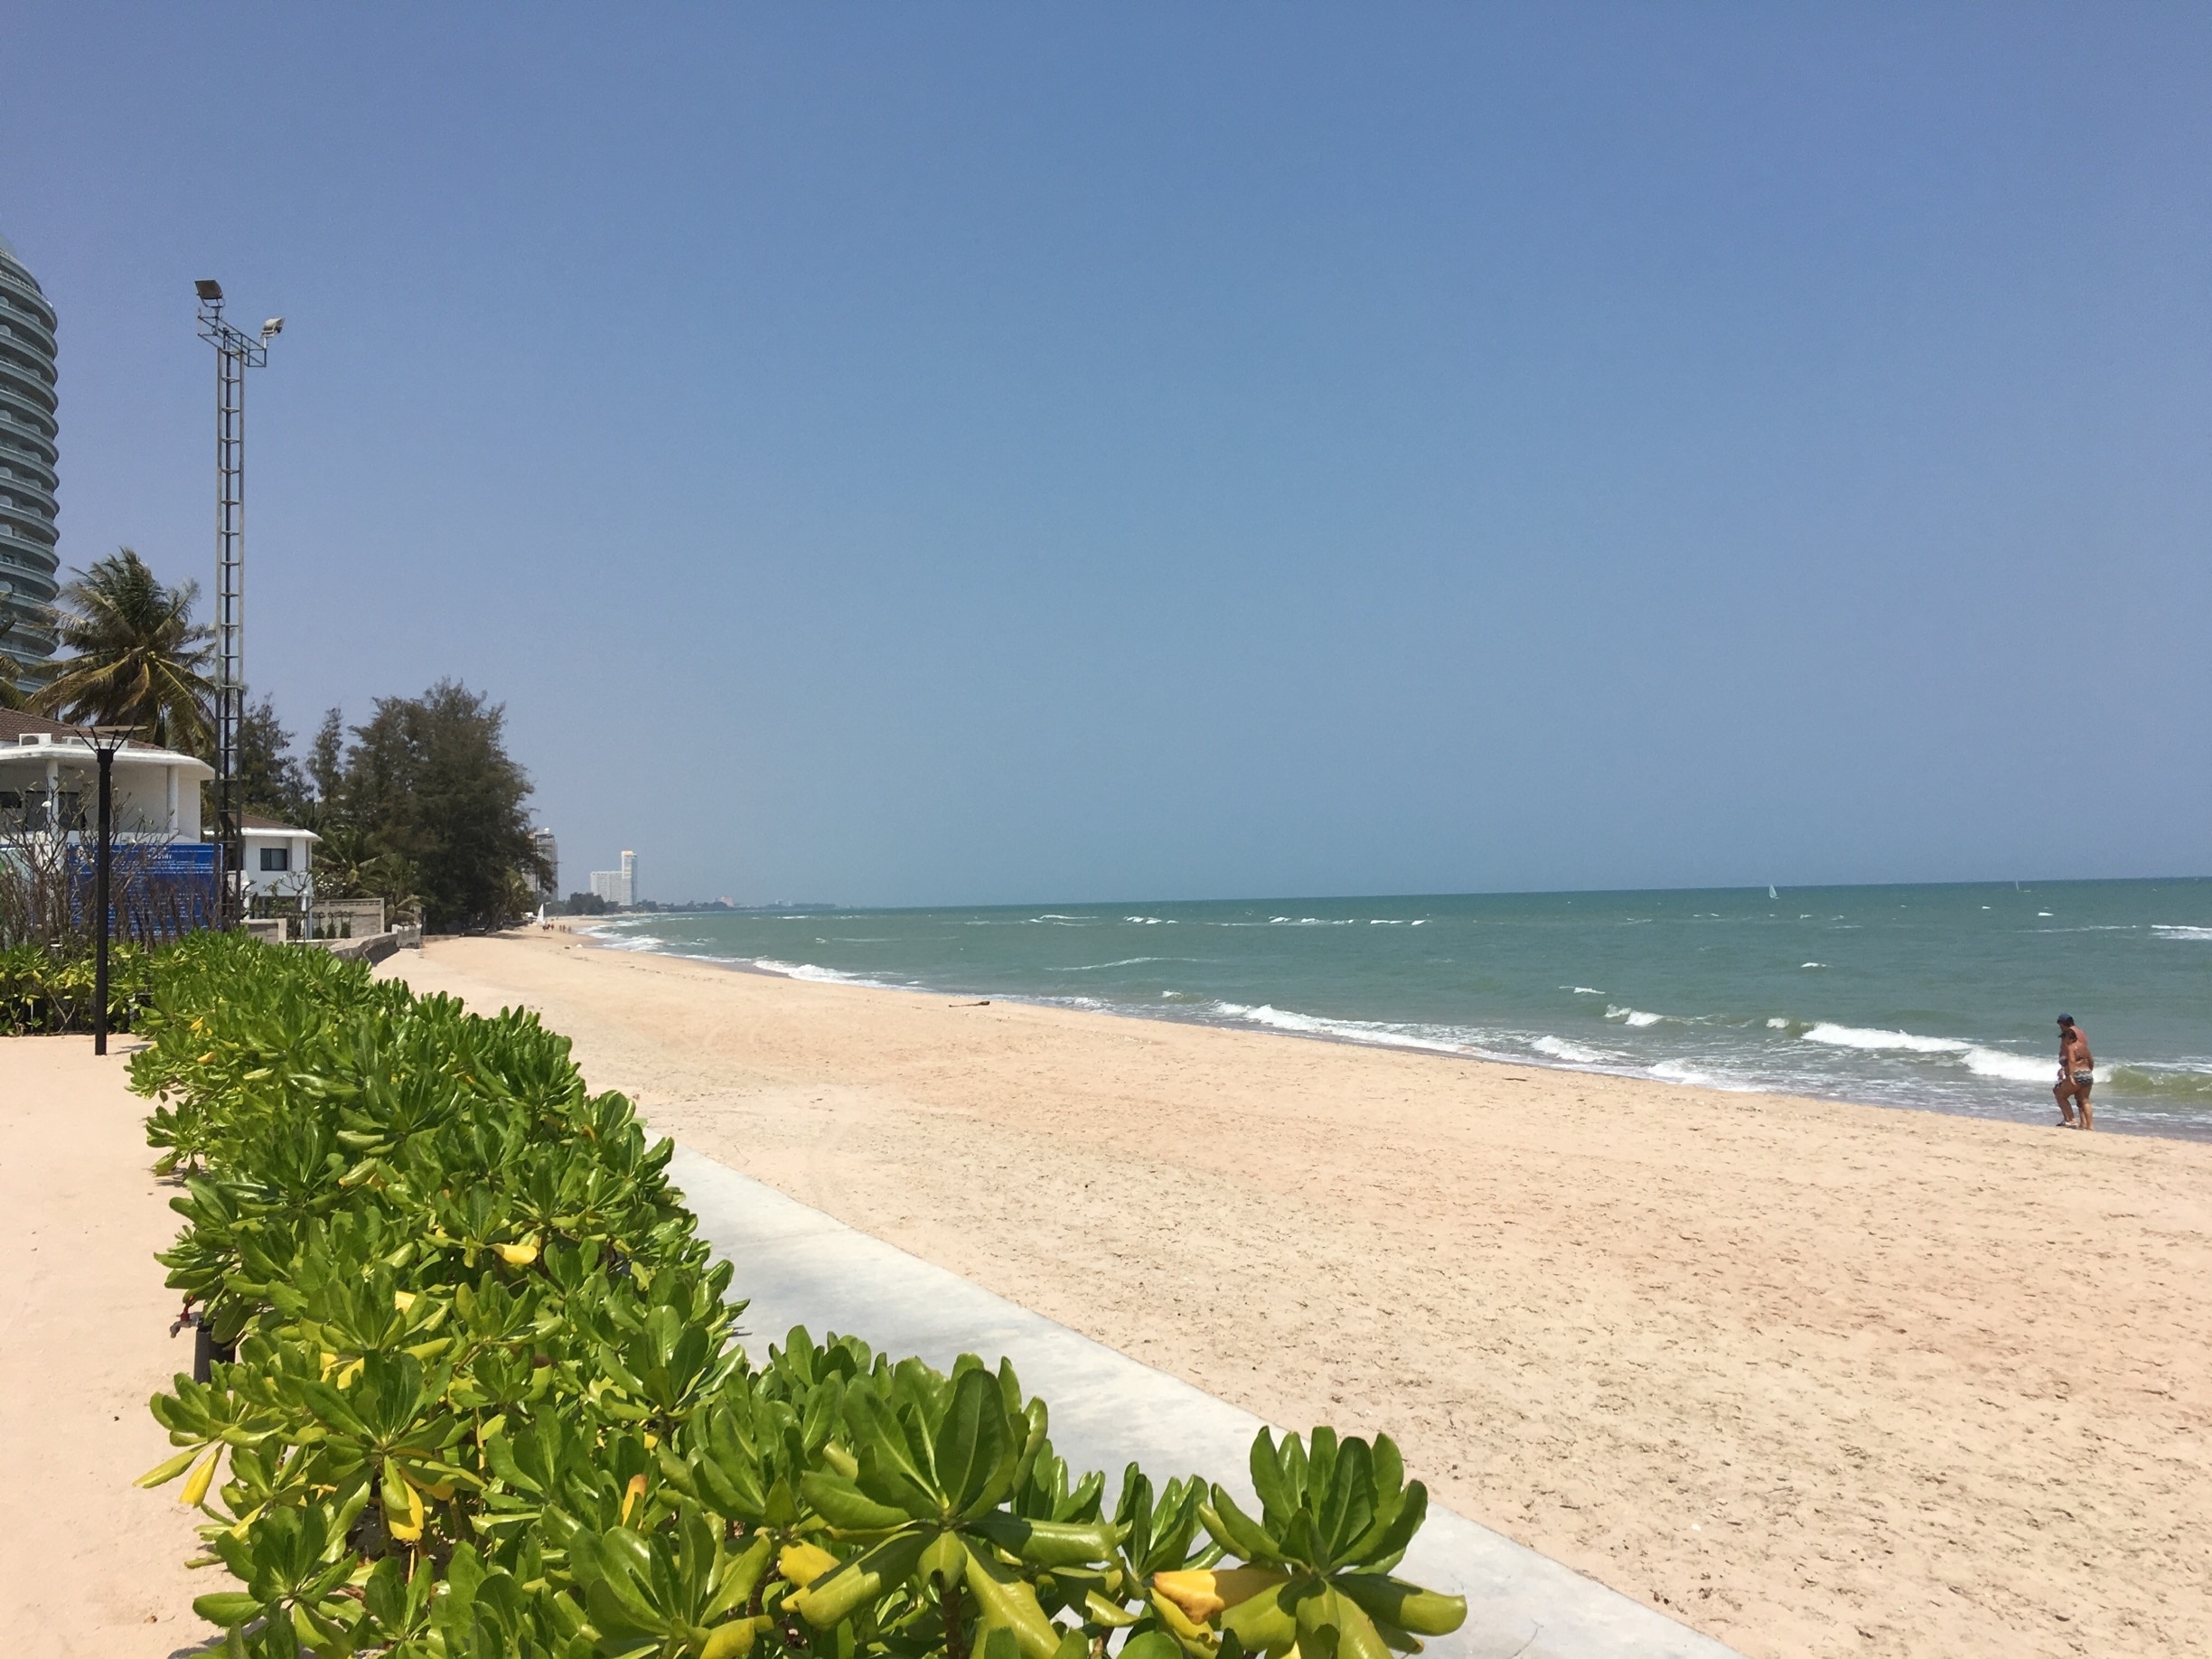 Cha-am in Phetchaburi Province is a quiet beach town that is well worth spending a relaxing holiday there. Not as costly or busy as nearby Hua Hin, Cha-am has plenty of good hotels, great seafood restaurants and a laid-back charm suitable for families.